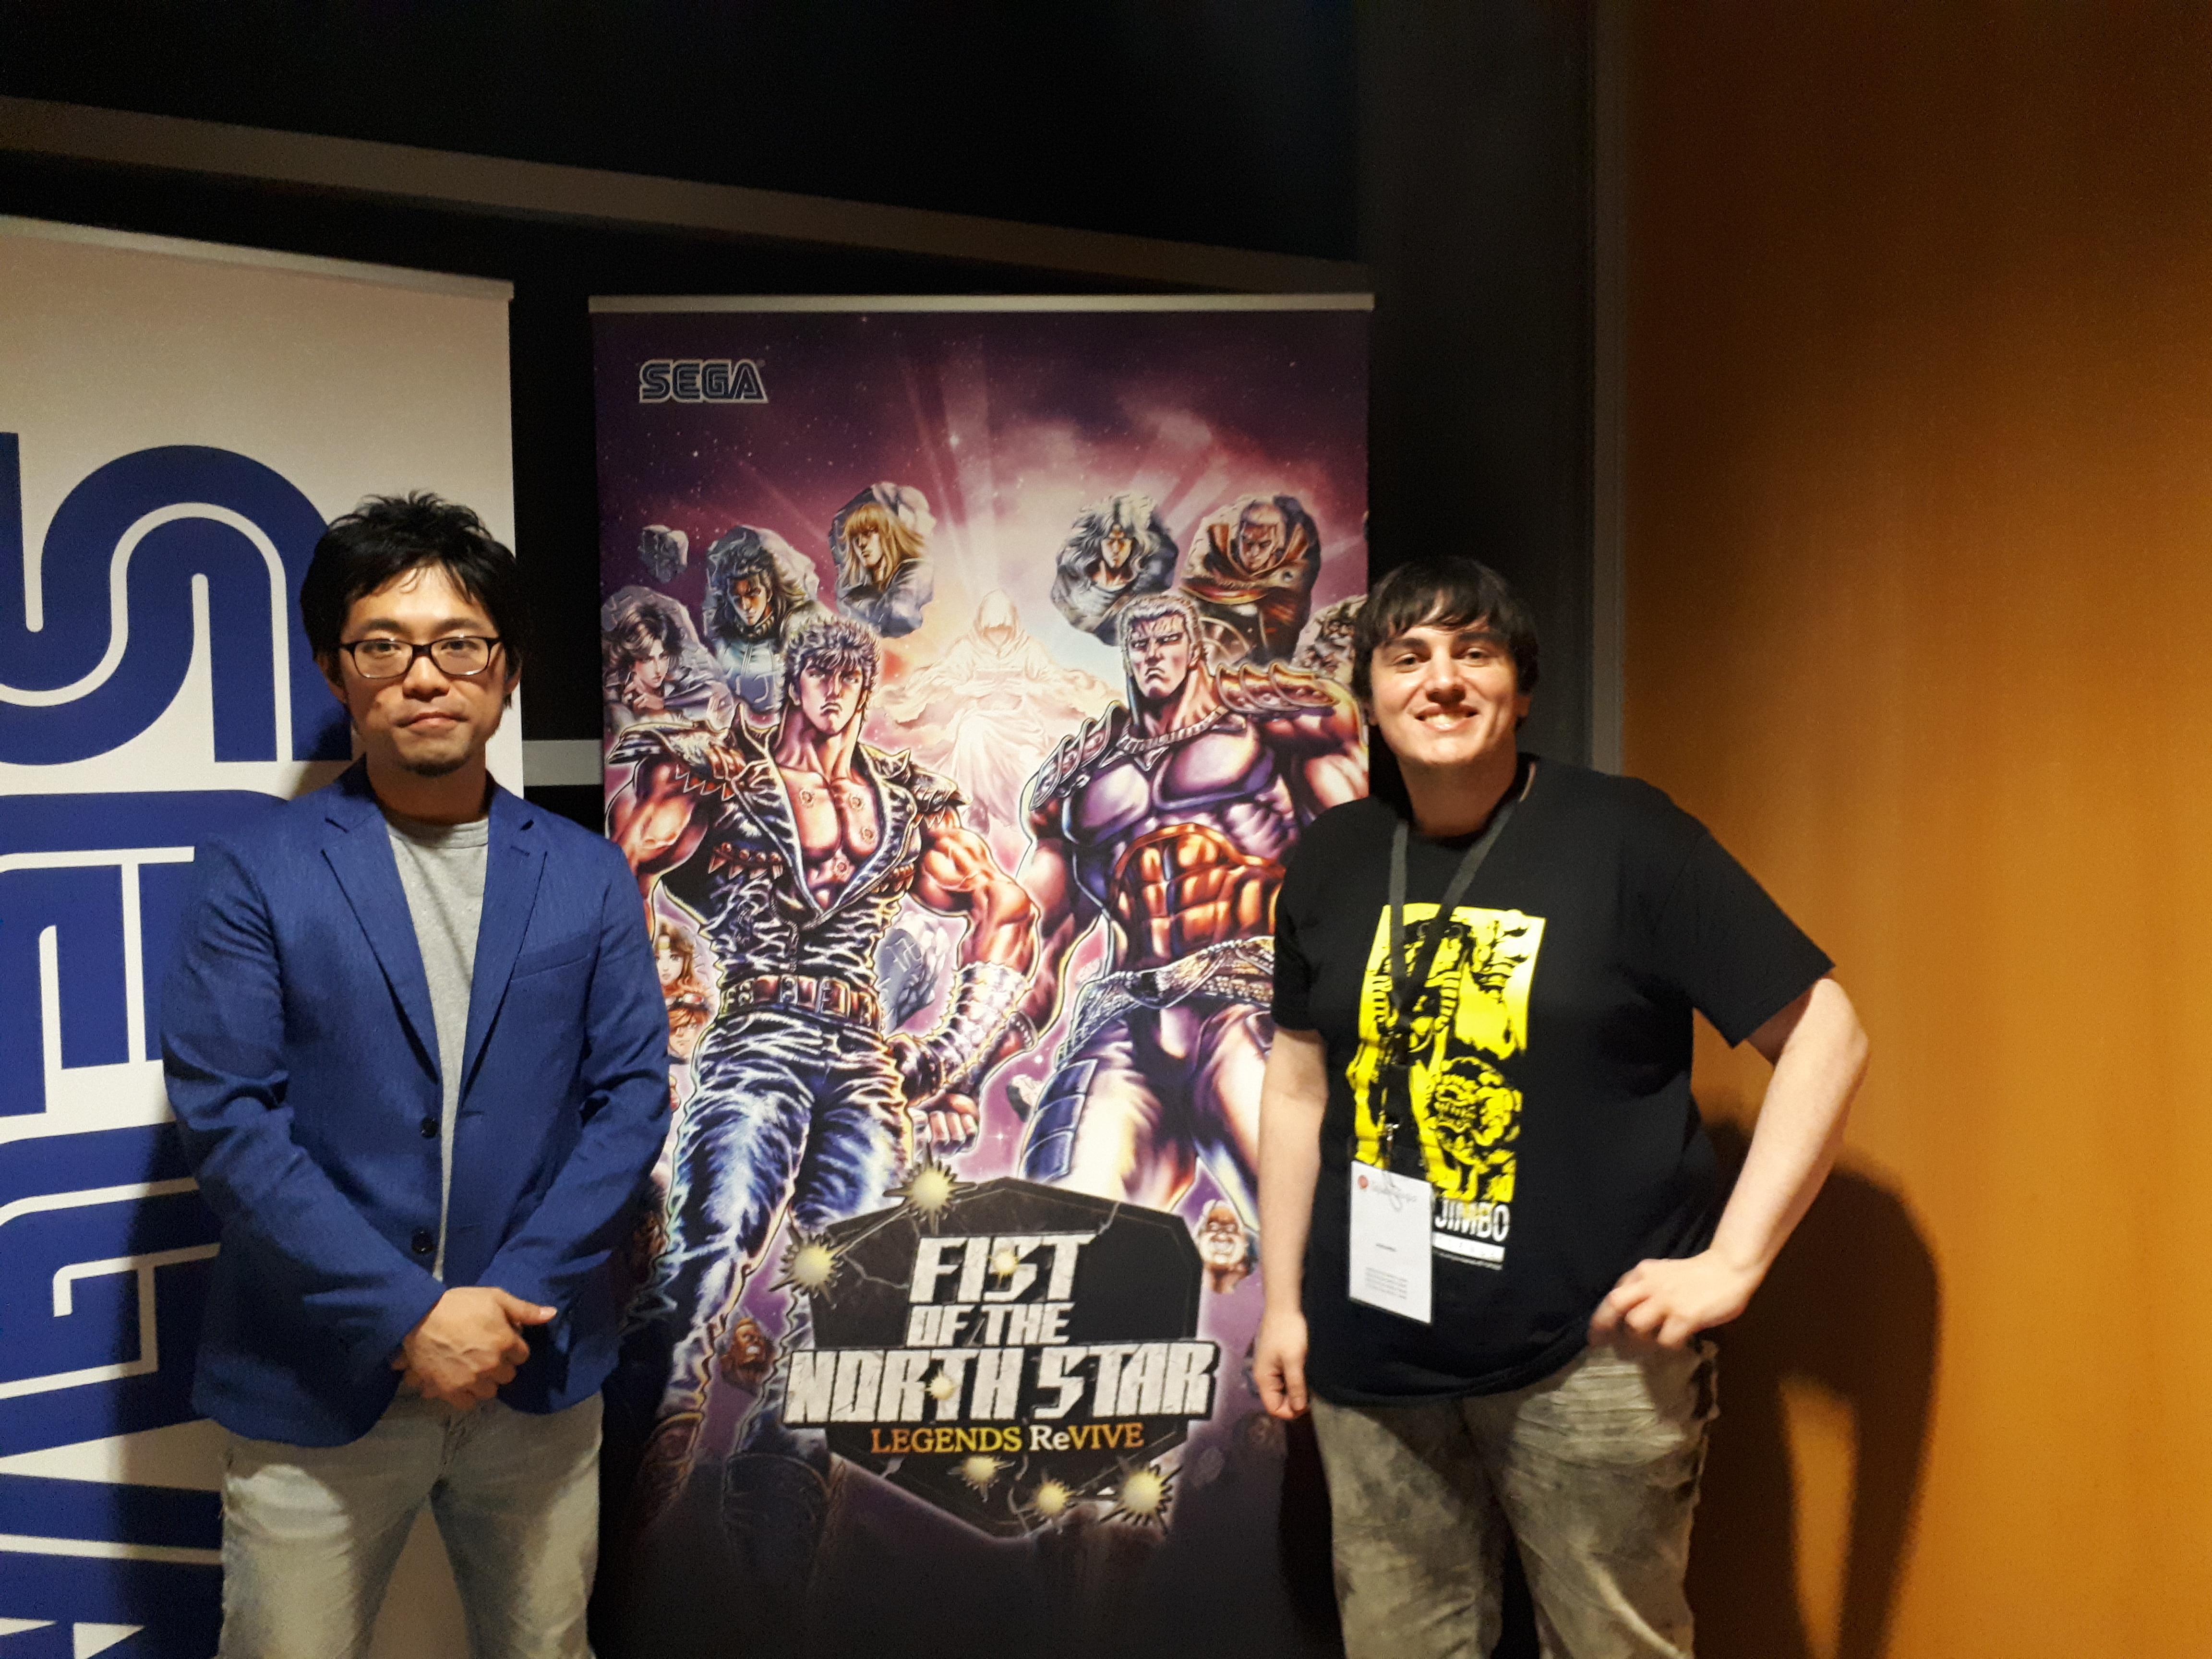 Fist of the north star legend revive producer 3